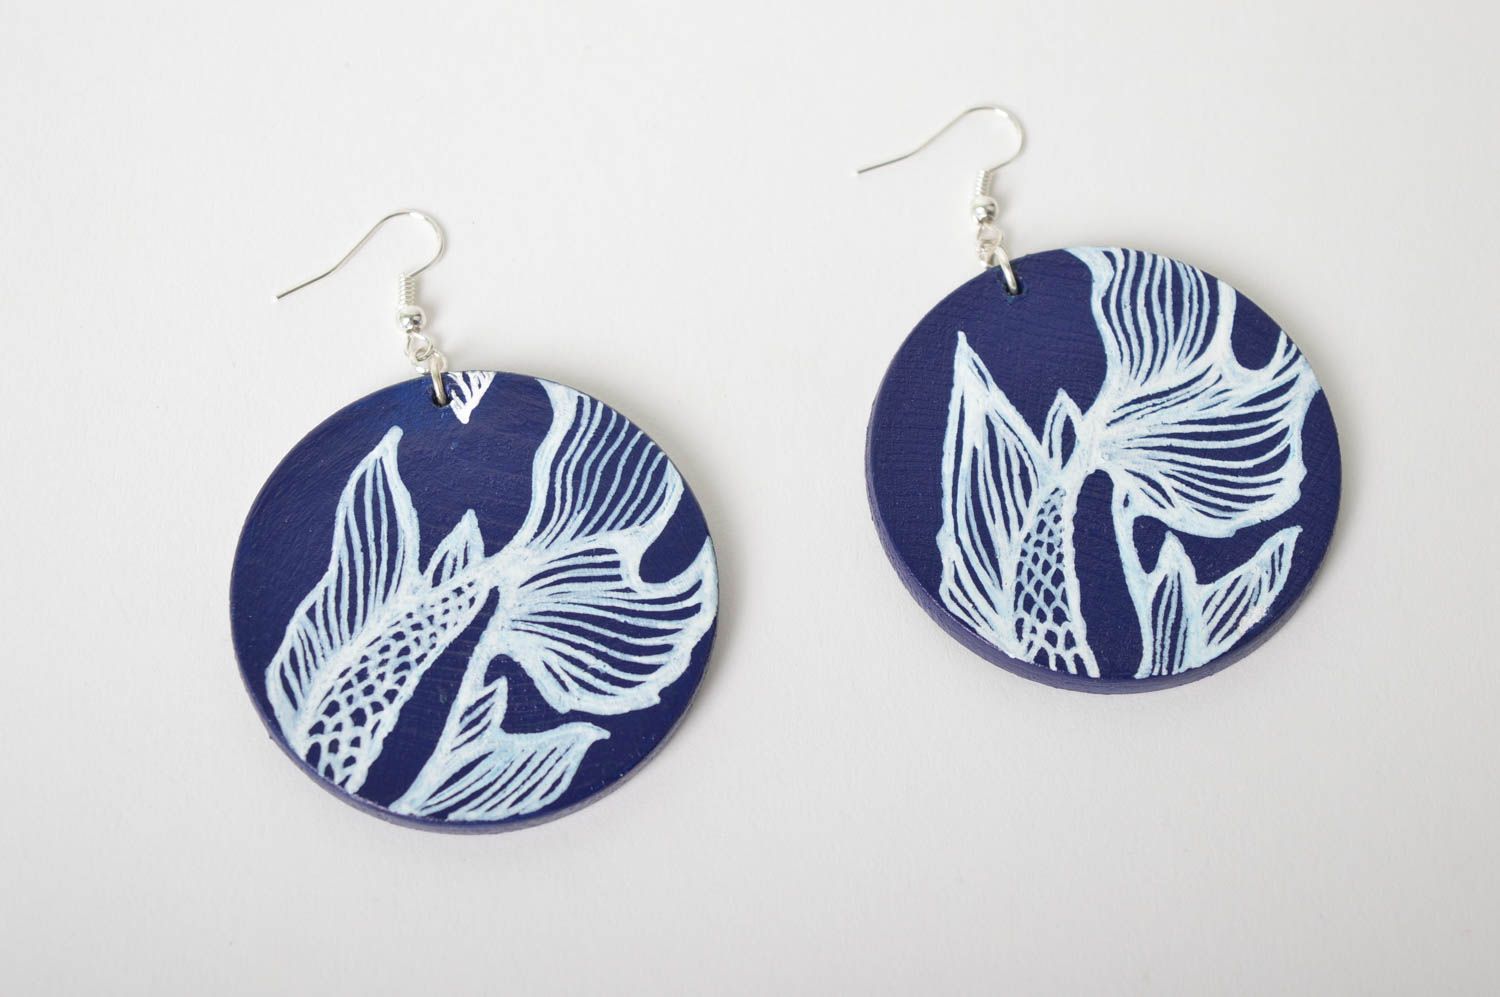 Wooden earrings handmade round earrings cute earrings with fishes gift for girls photo 2